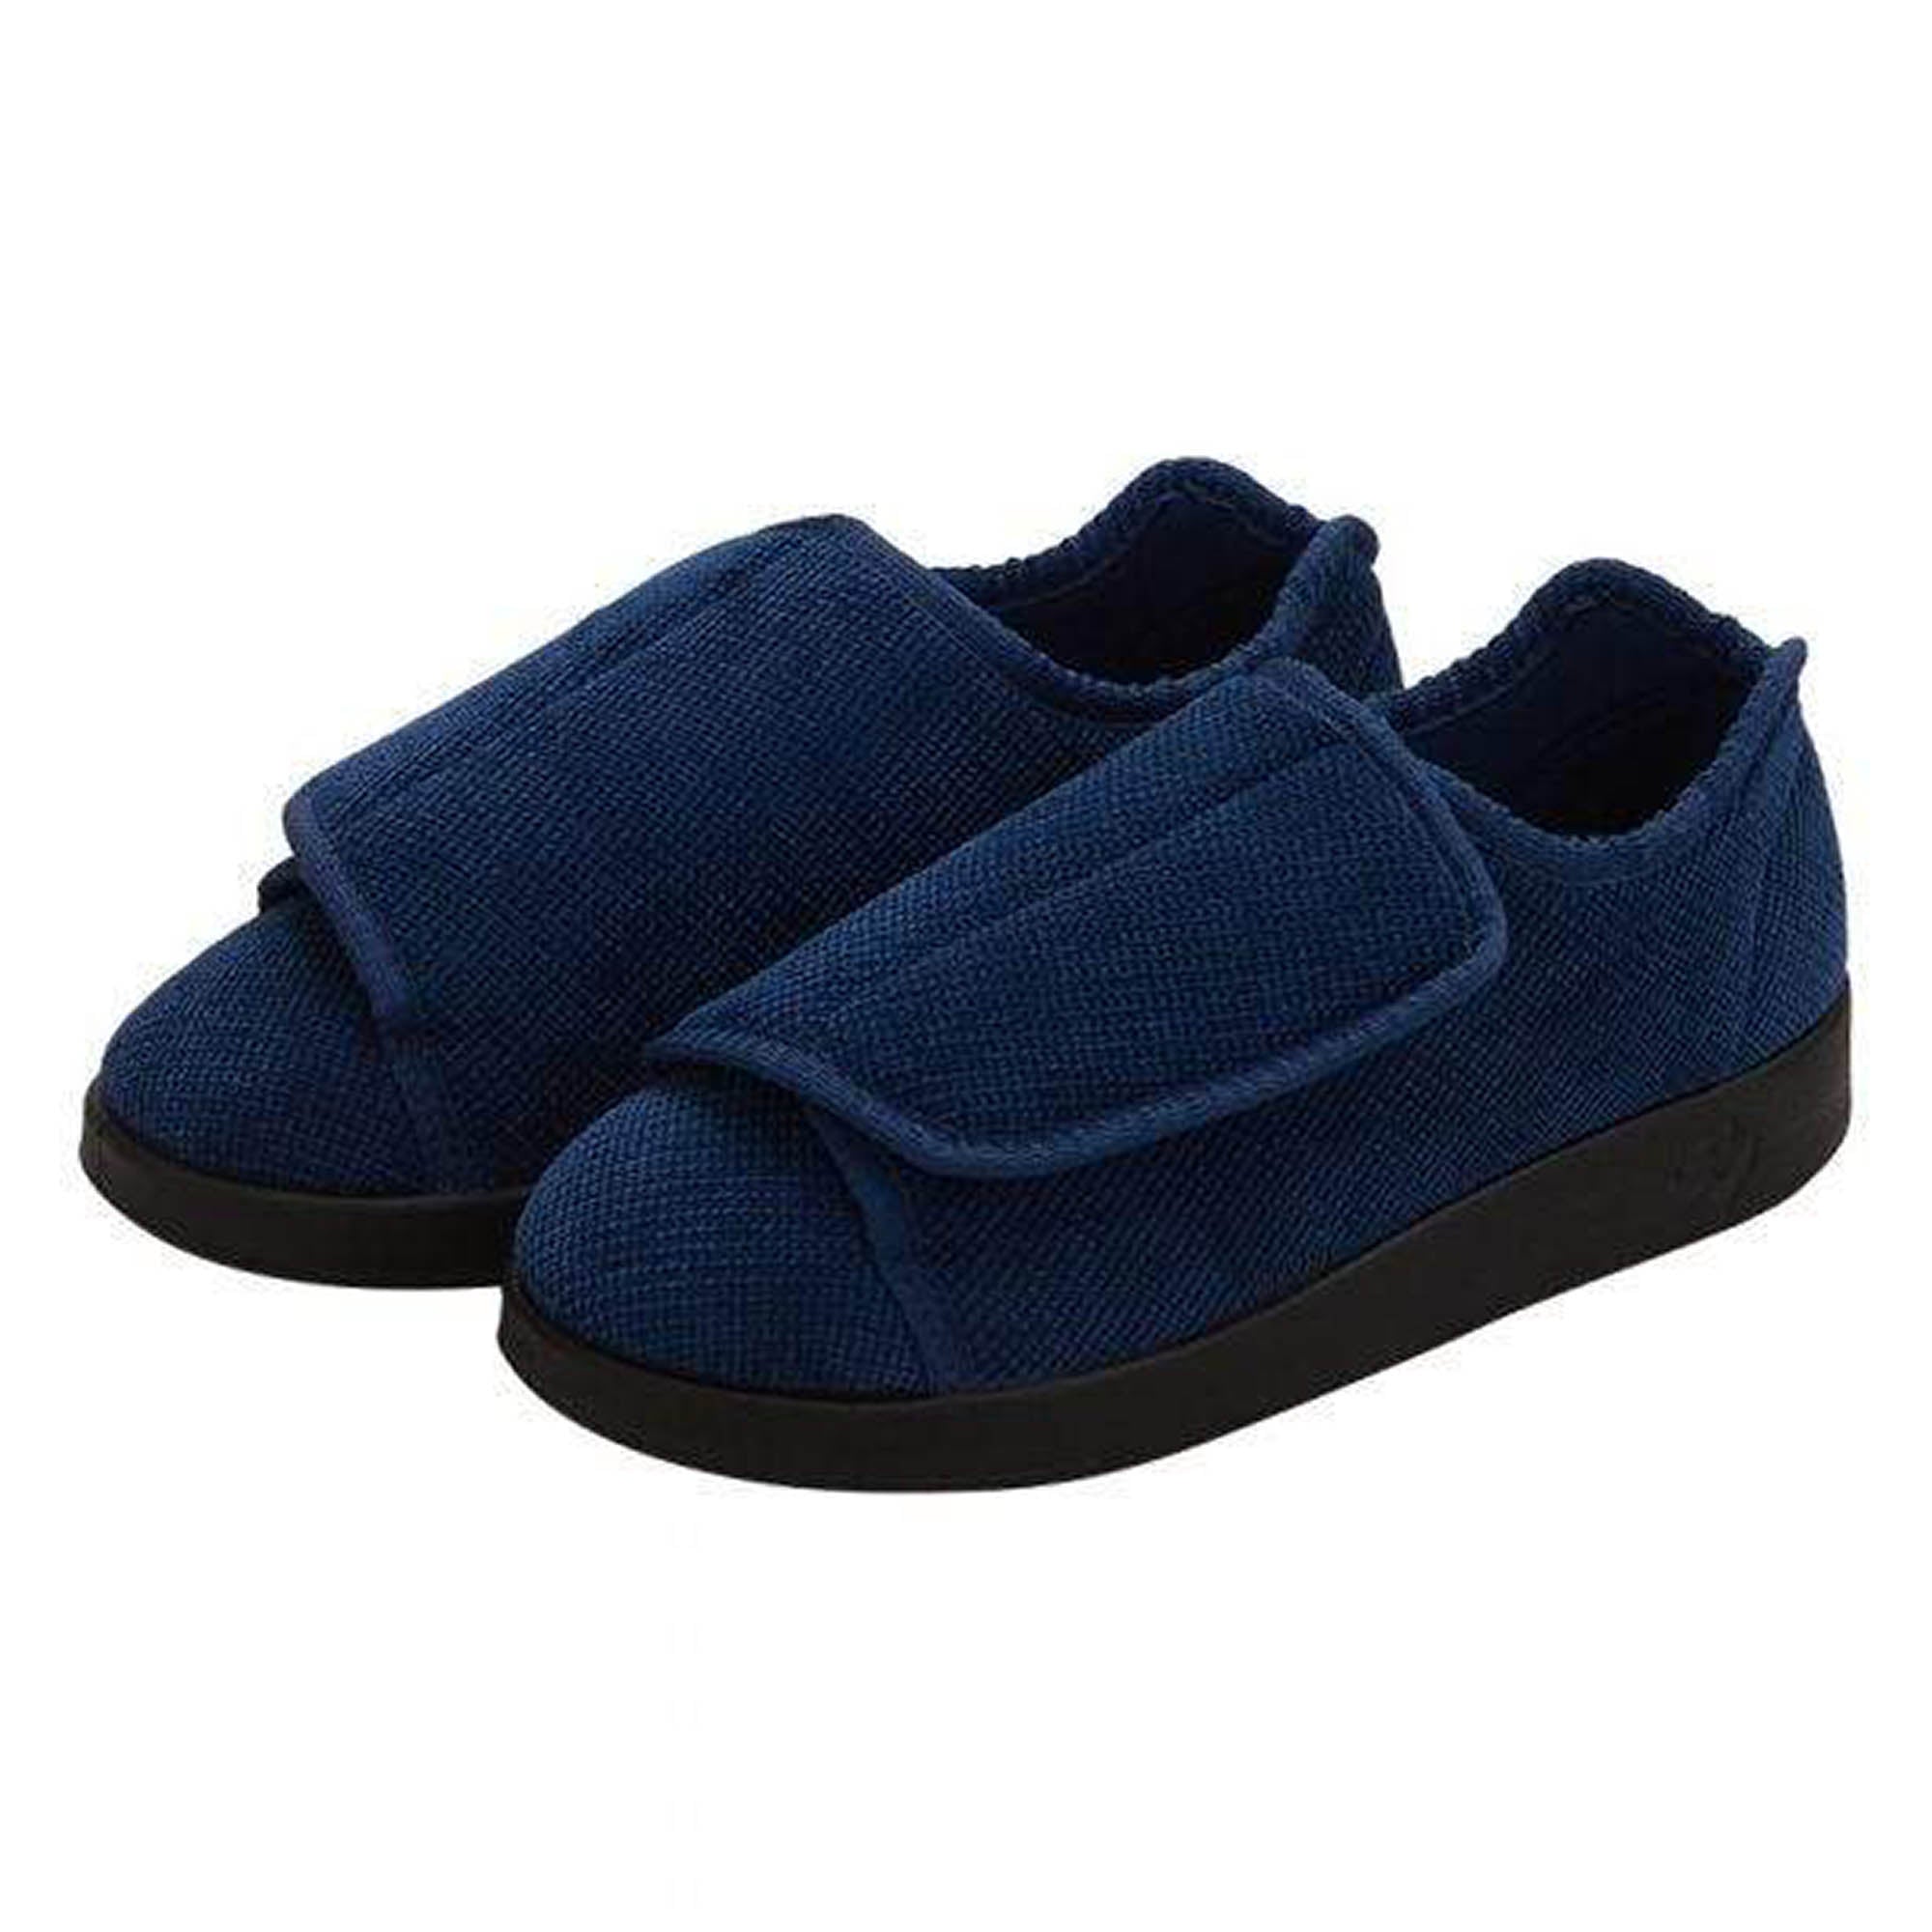 Silverts Women's Antimicrobial Extra Extra Wide Easy-Closure Slippers - Navy - 8